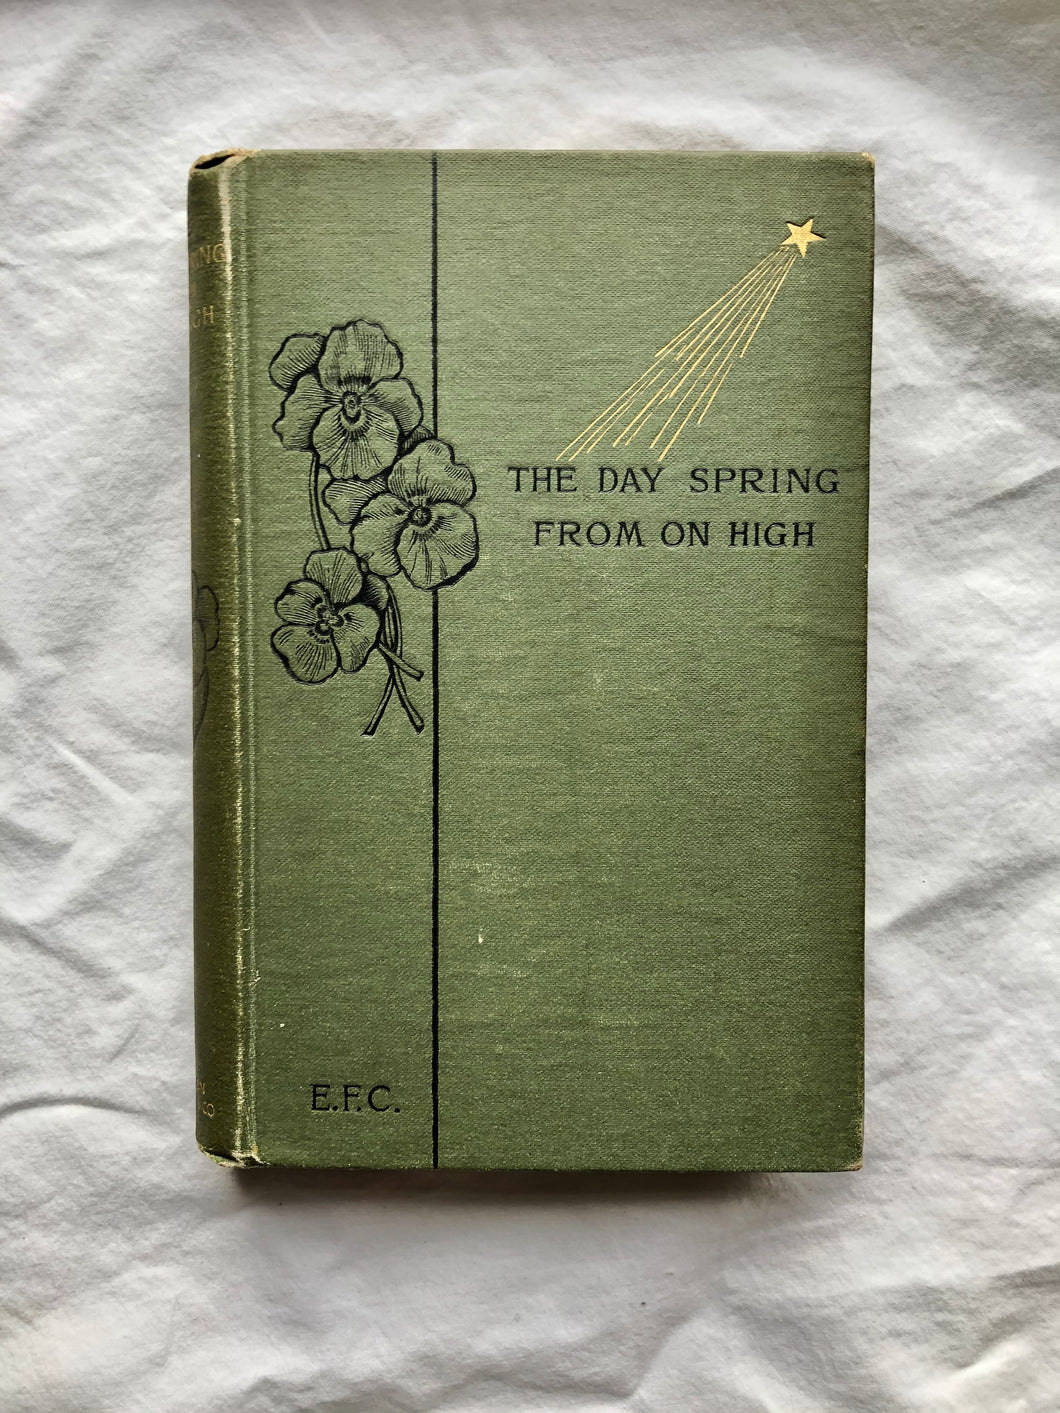 “The Dayspring From on High” selections arranged by Emma Forbes Cary